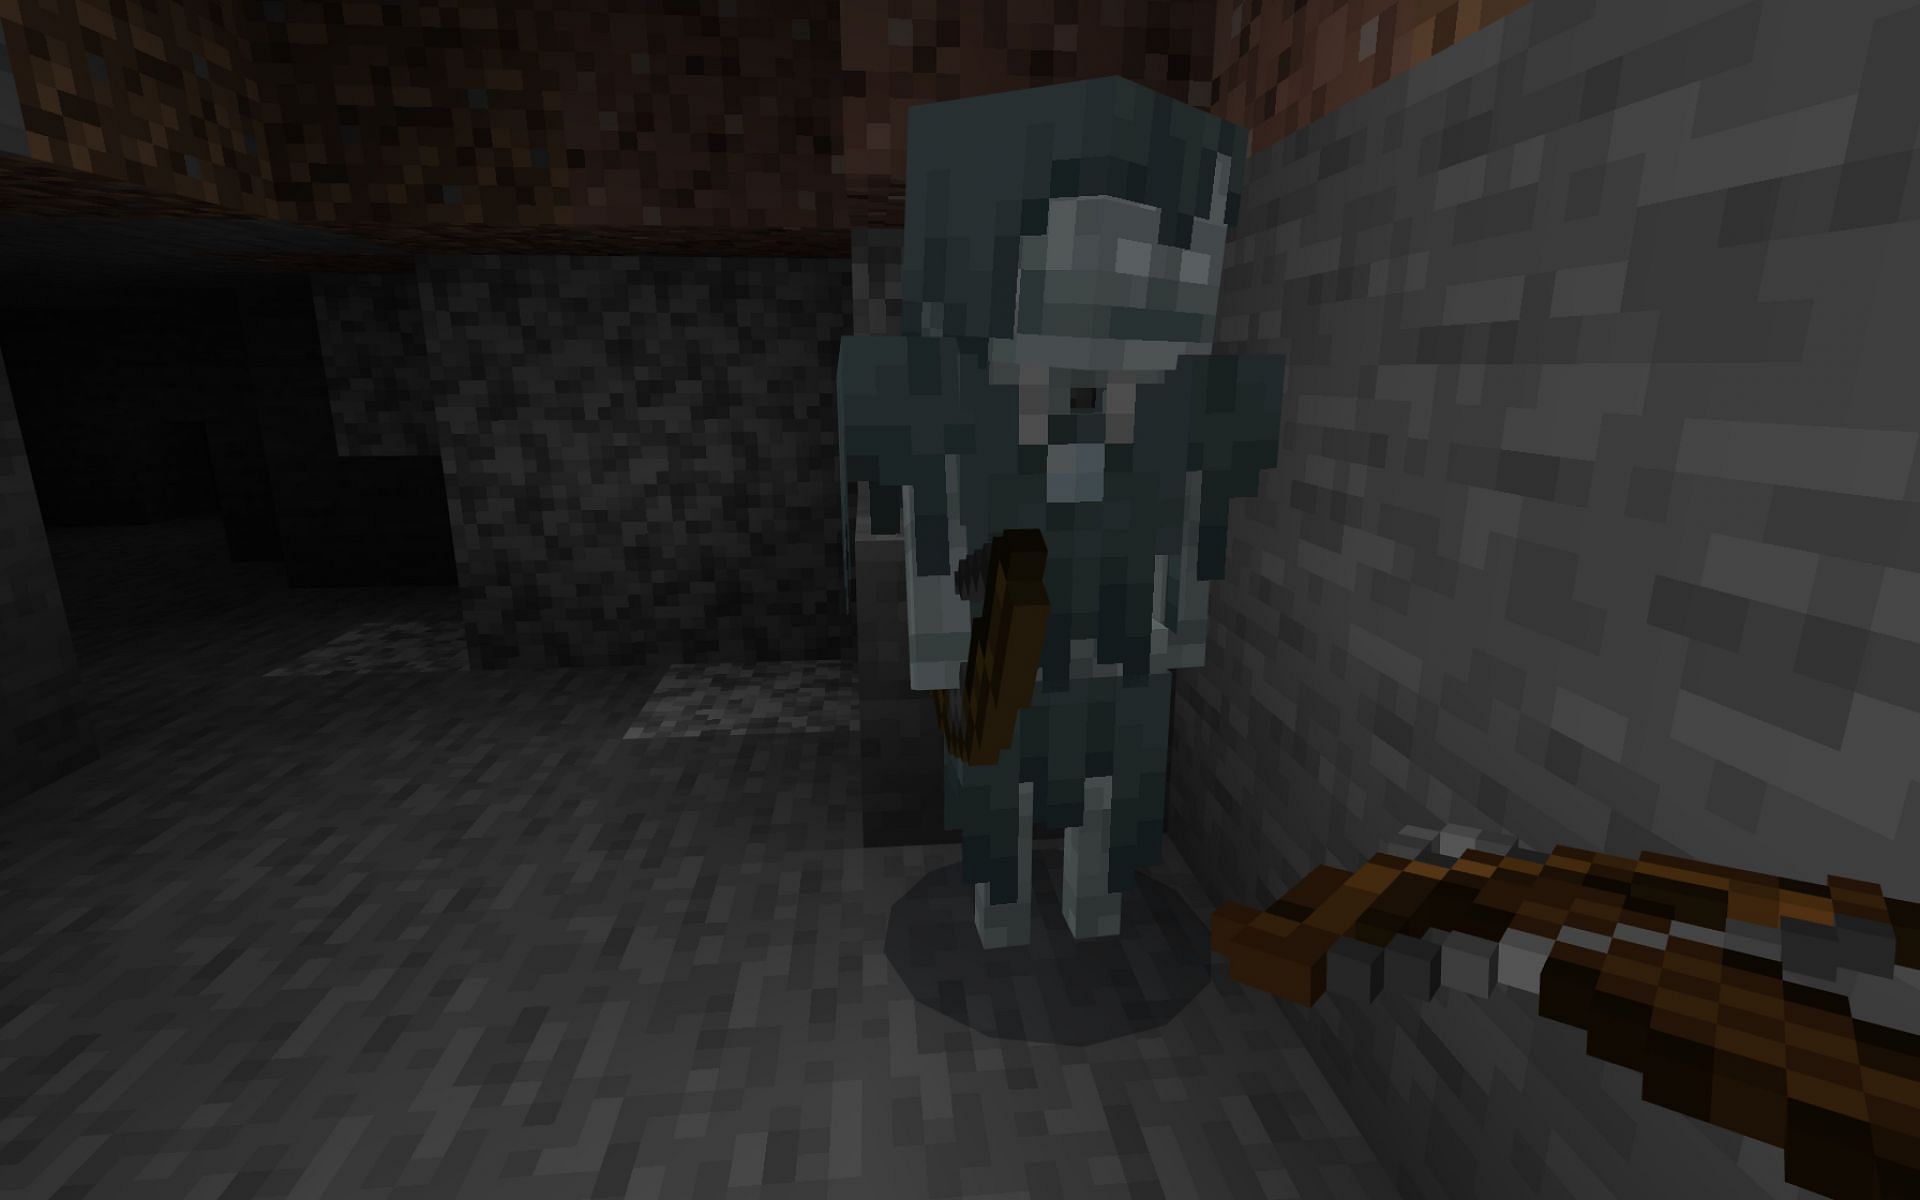 Strays, like skeletons, will shoot the player with arrows from afar but with slowing arrows (Image via Minecraft)